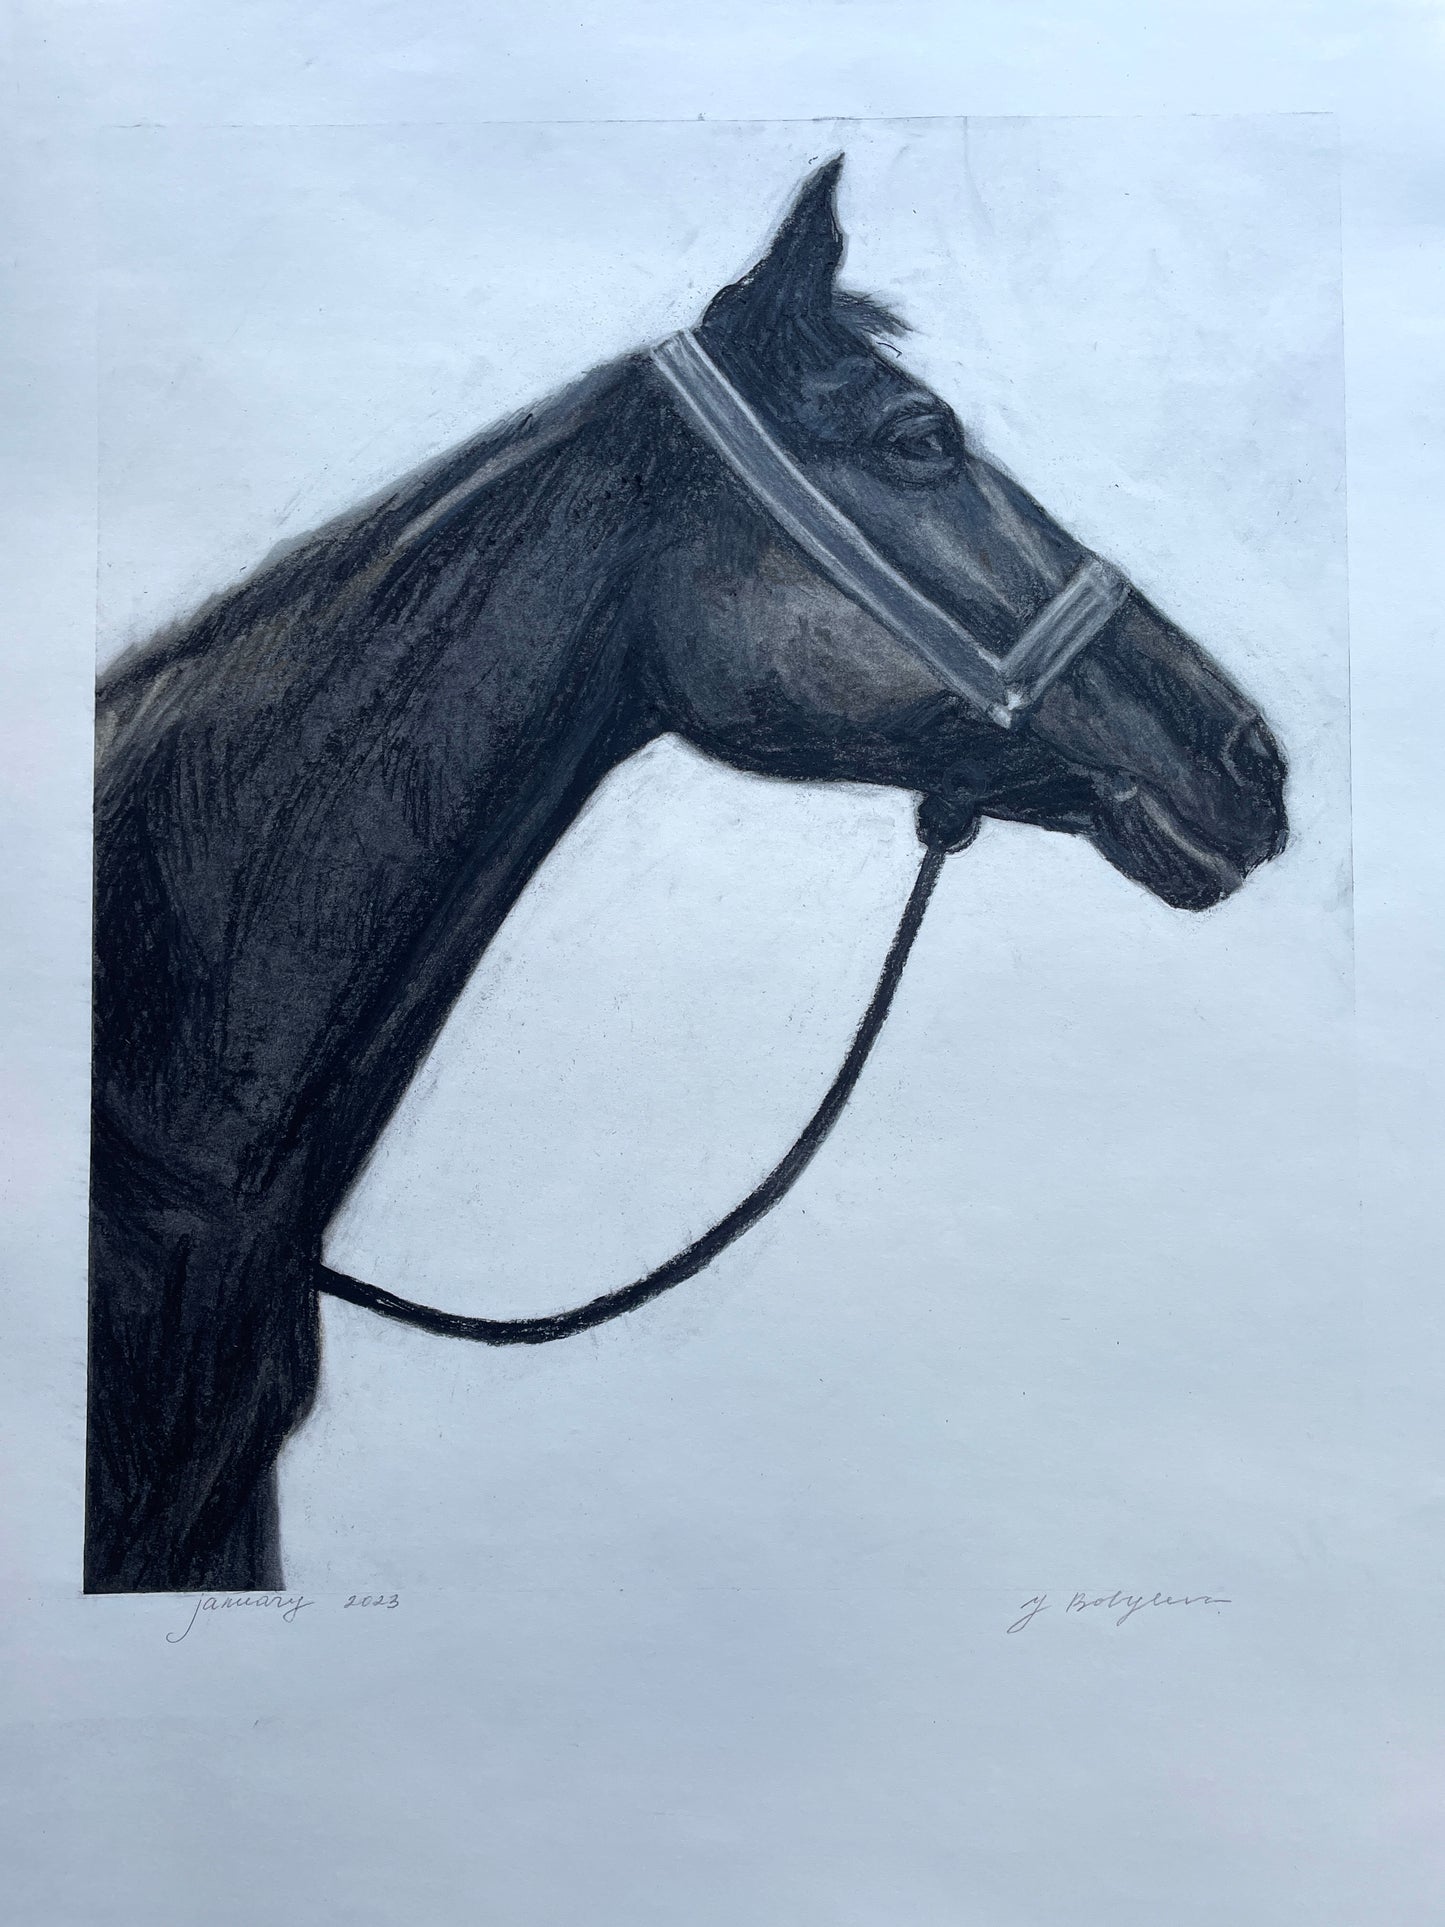 Detailed artwork of a horse in black and white